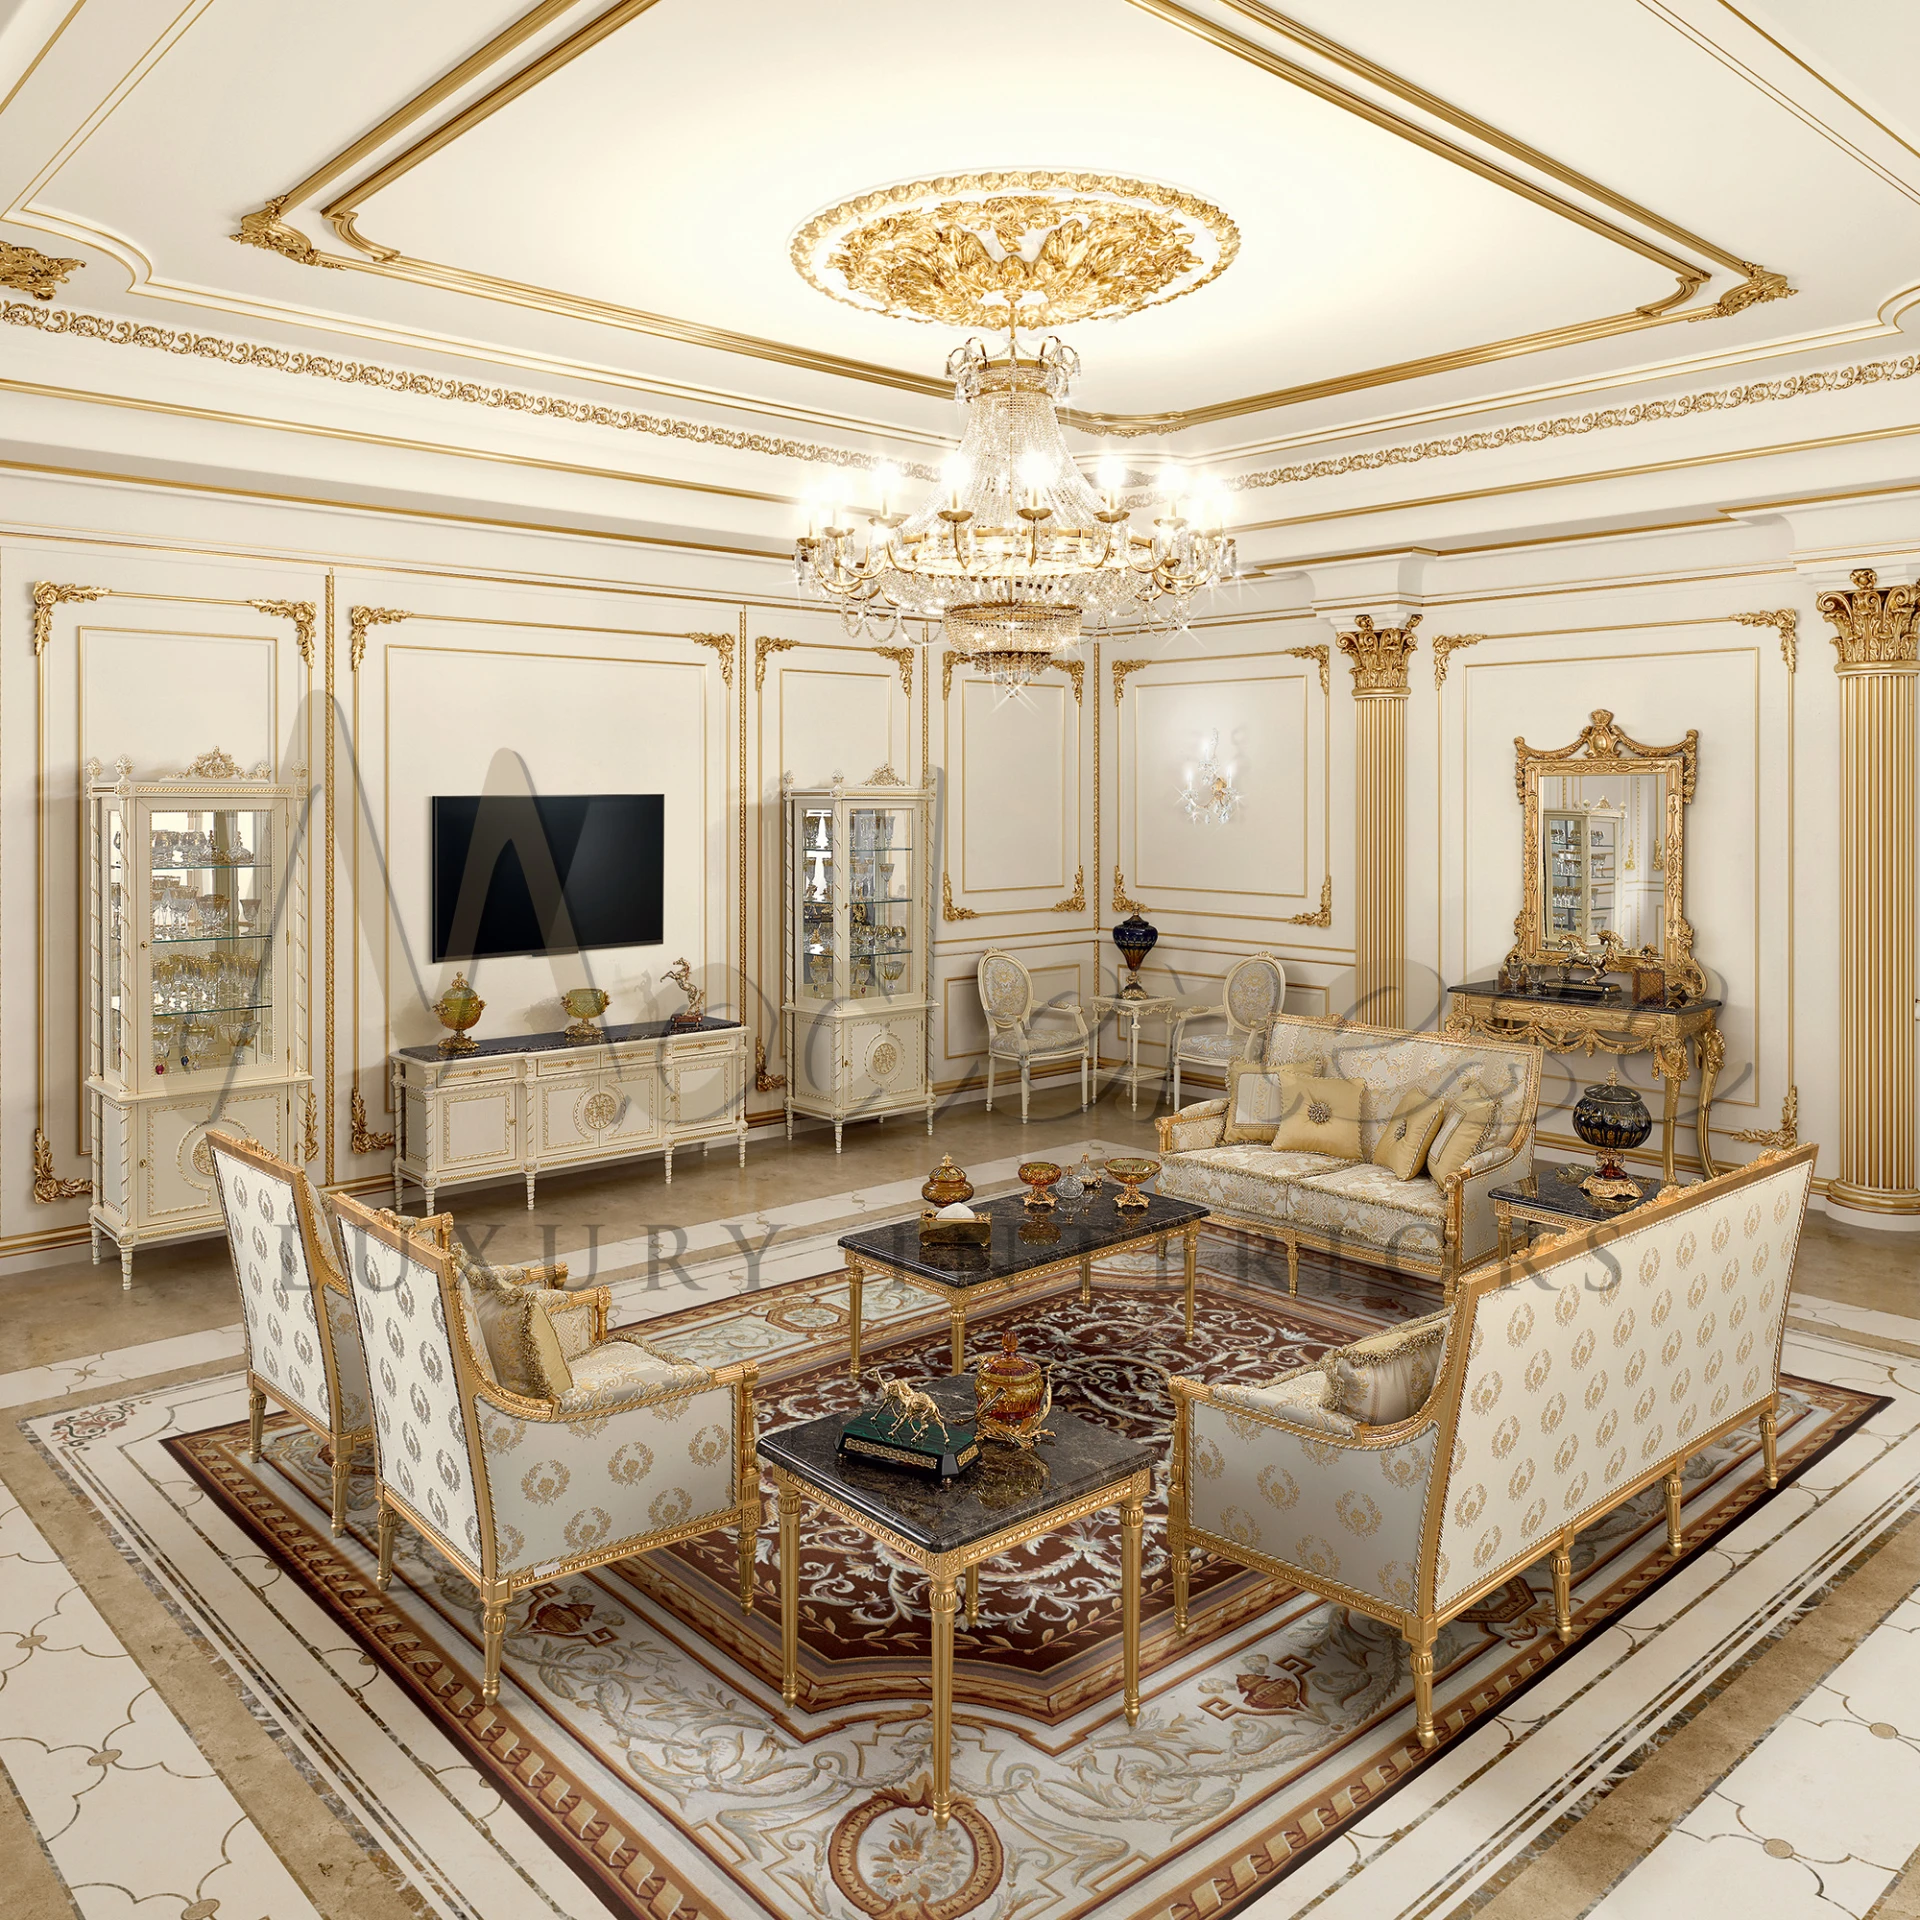 Luxurious room interior with complicated golden wall trims, white and golden cabinets, and a large seating area